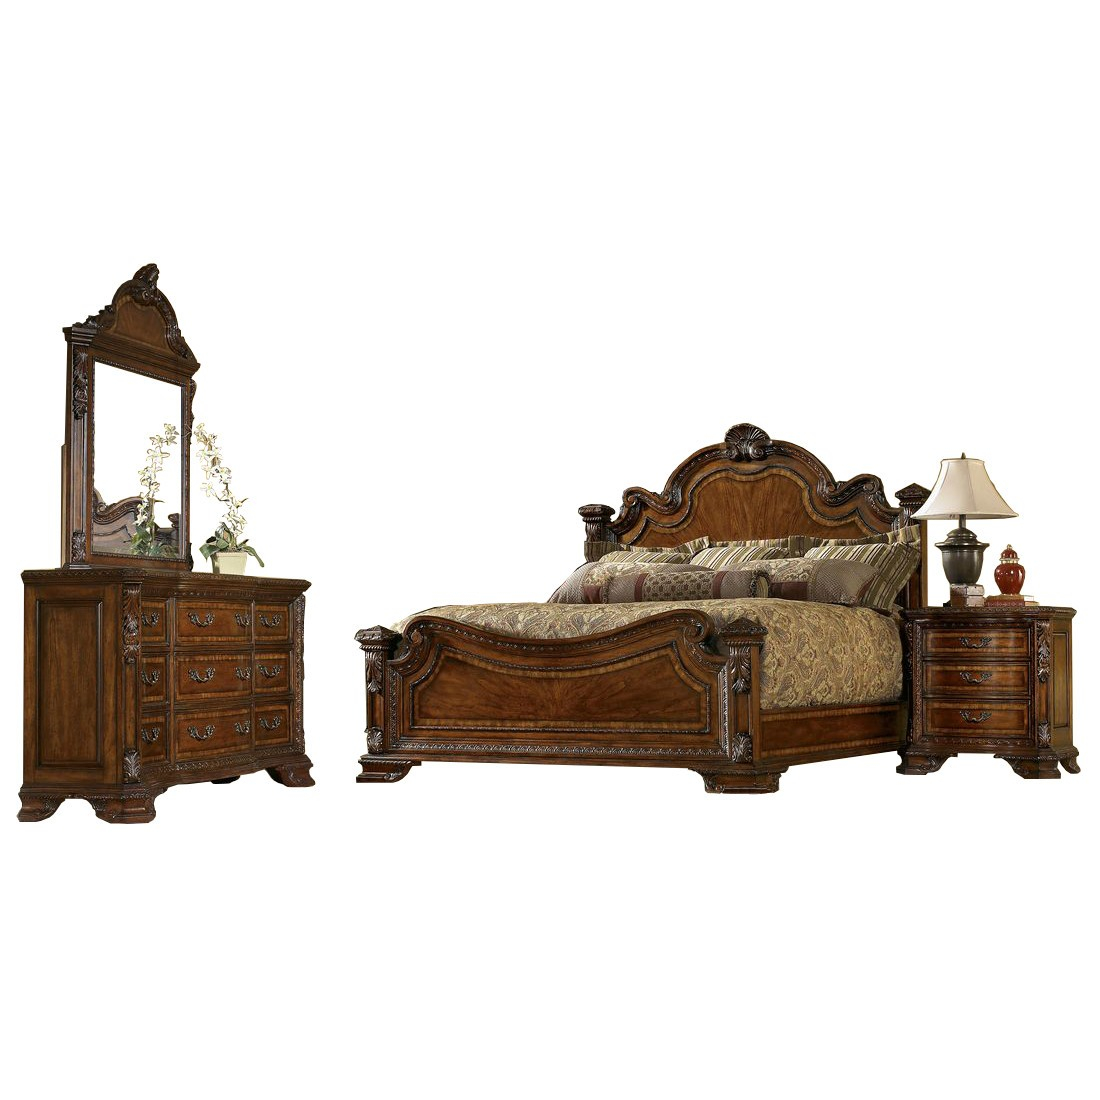 Art Furniture Old World Estate Bedroom Set with regard to dimensions 1100 X 1100